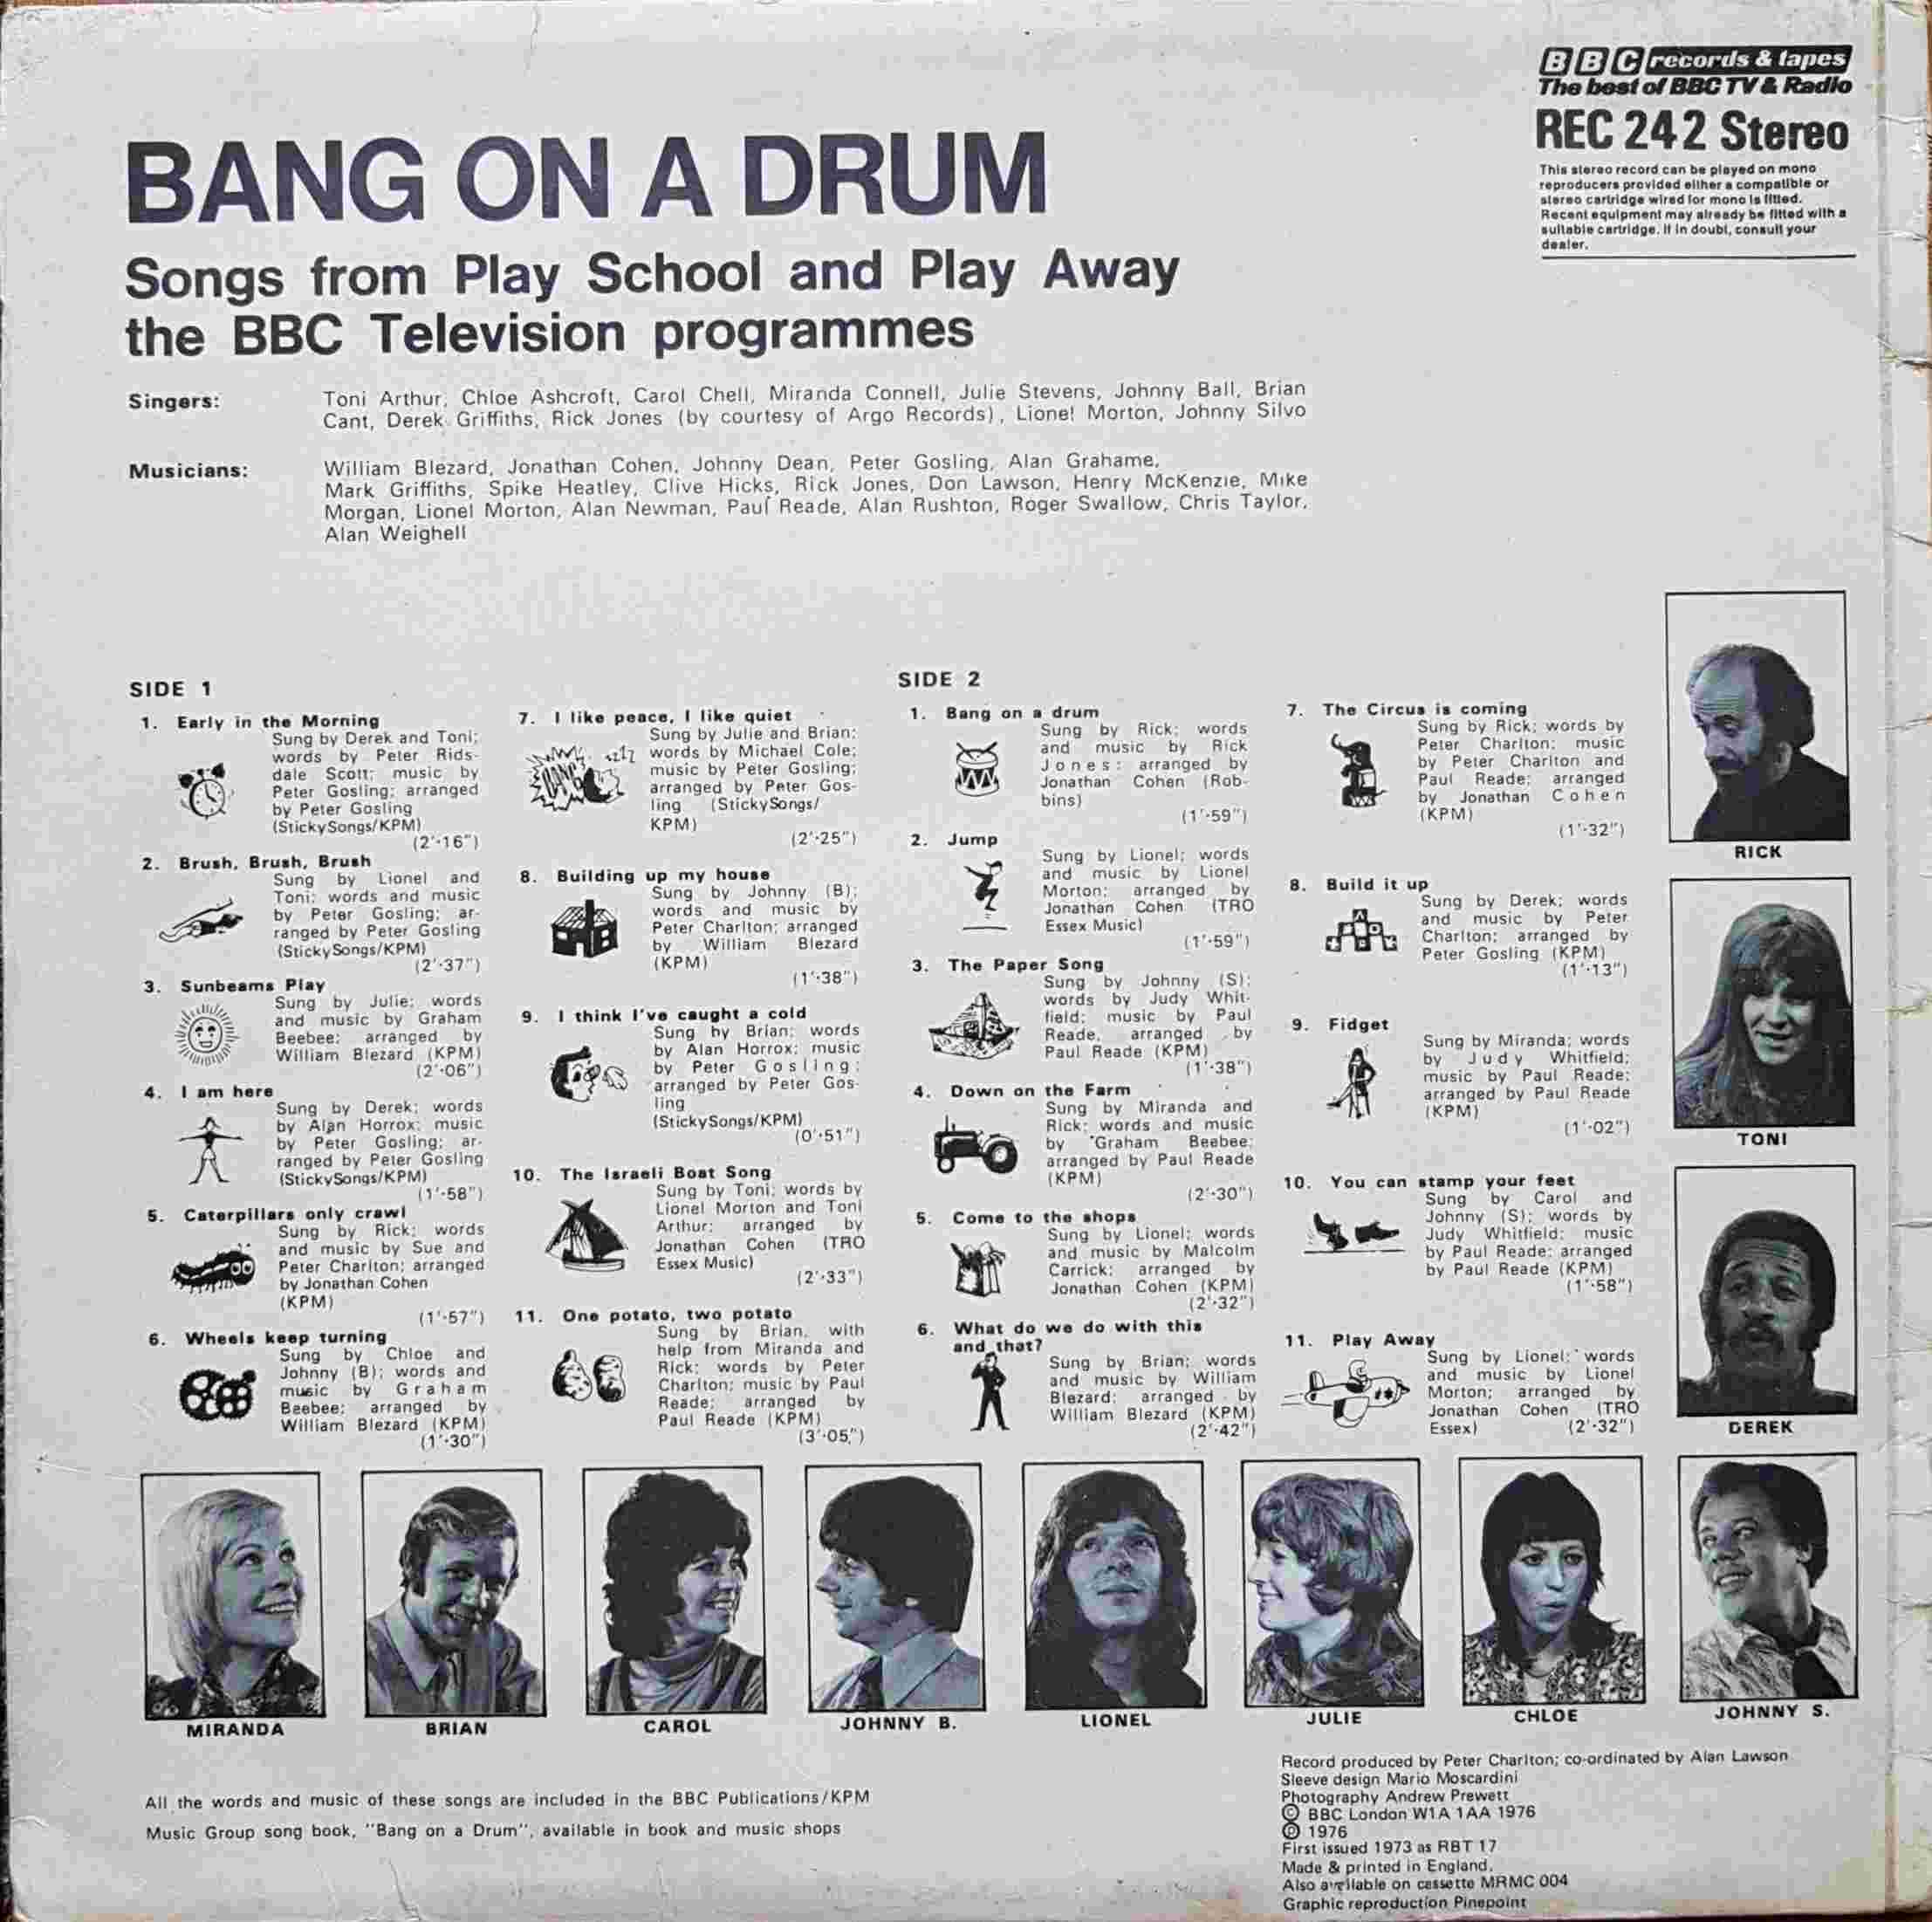 Picture of REC 242 Bang on a drum by artist Various from the BBC records and Tapes library